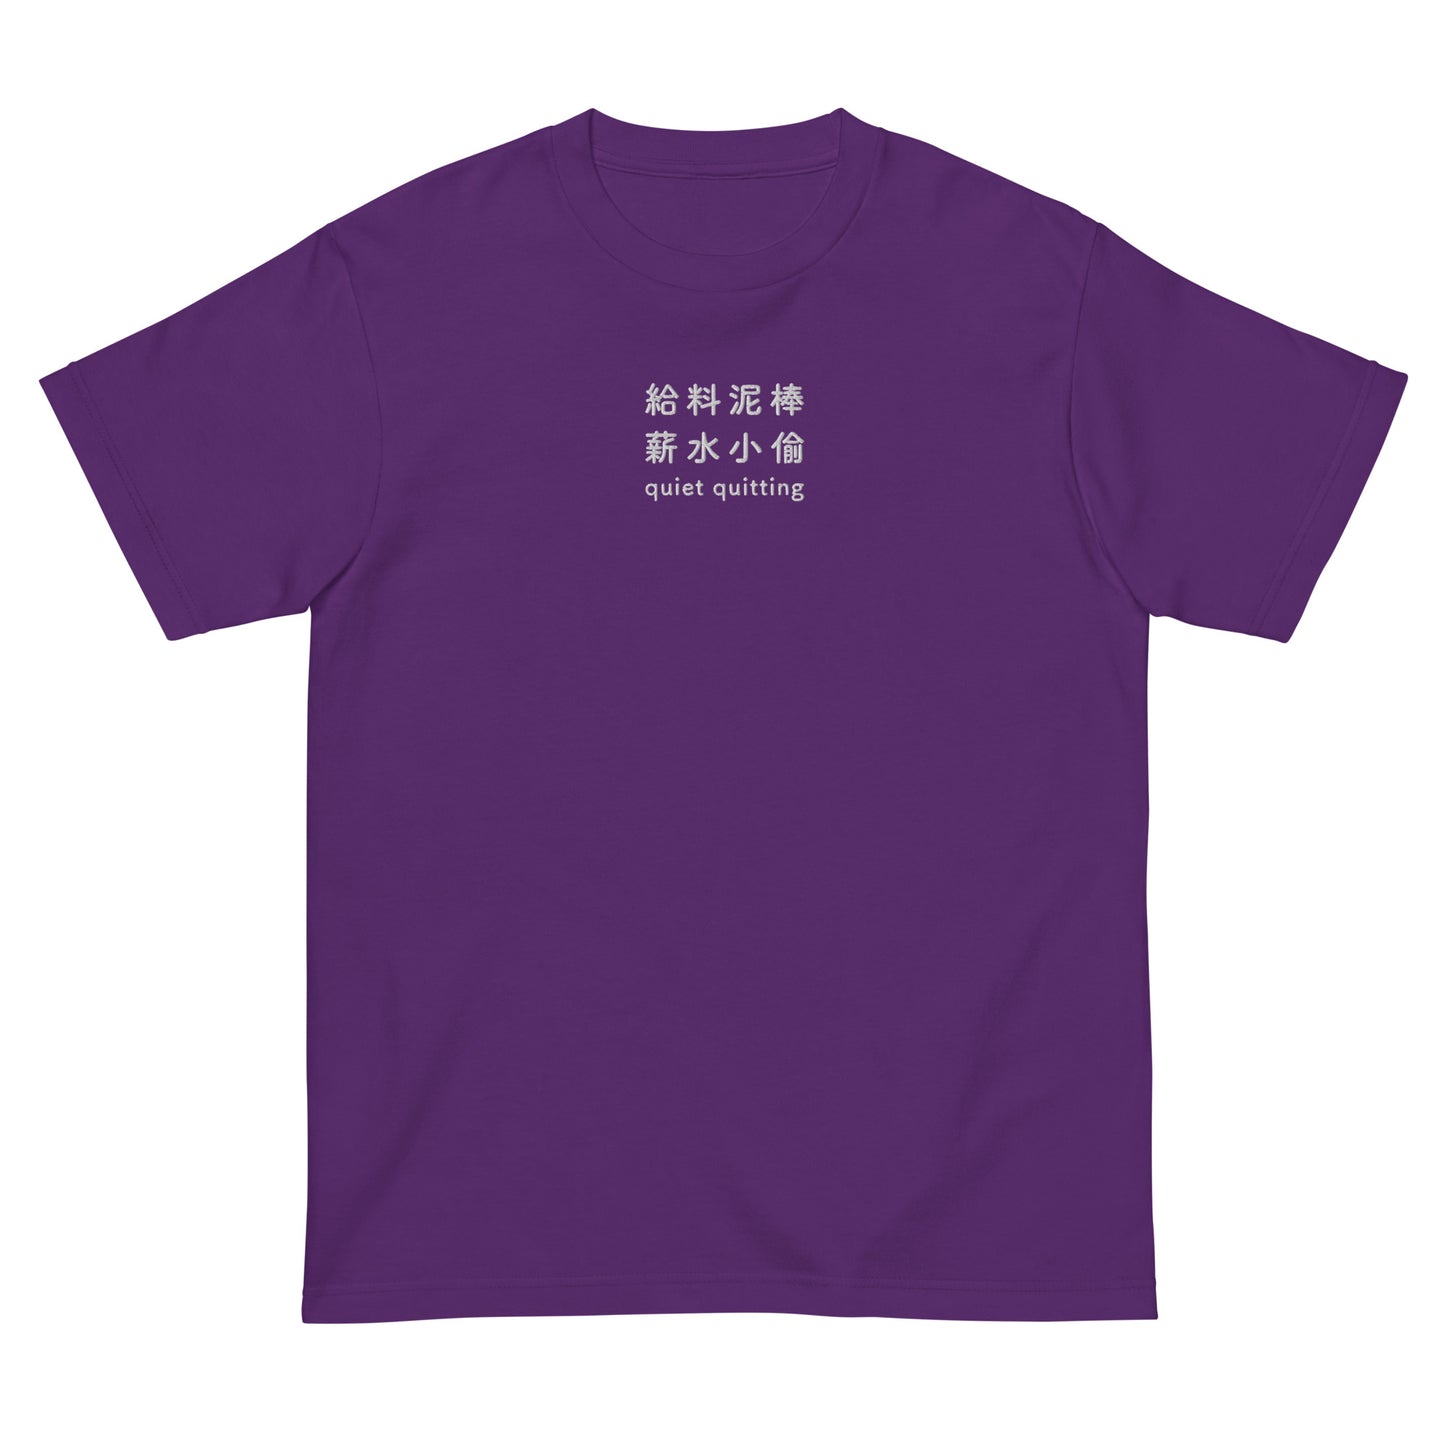 Purple High Quality Tee - Front Design with an White Embroidery "Quiet Quitting" in Japanese,Chinese and English